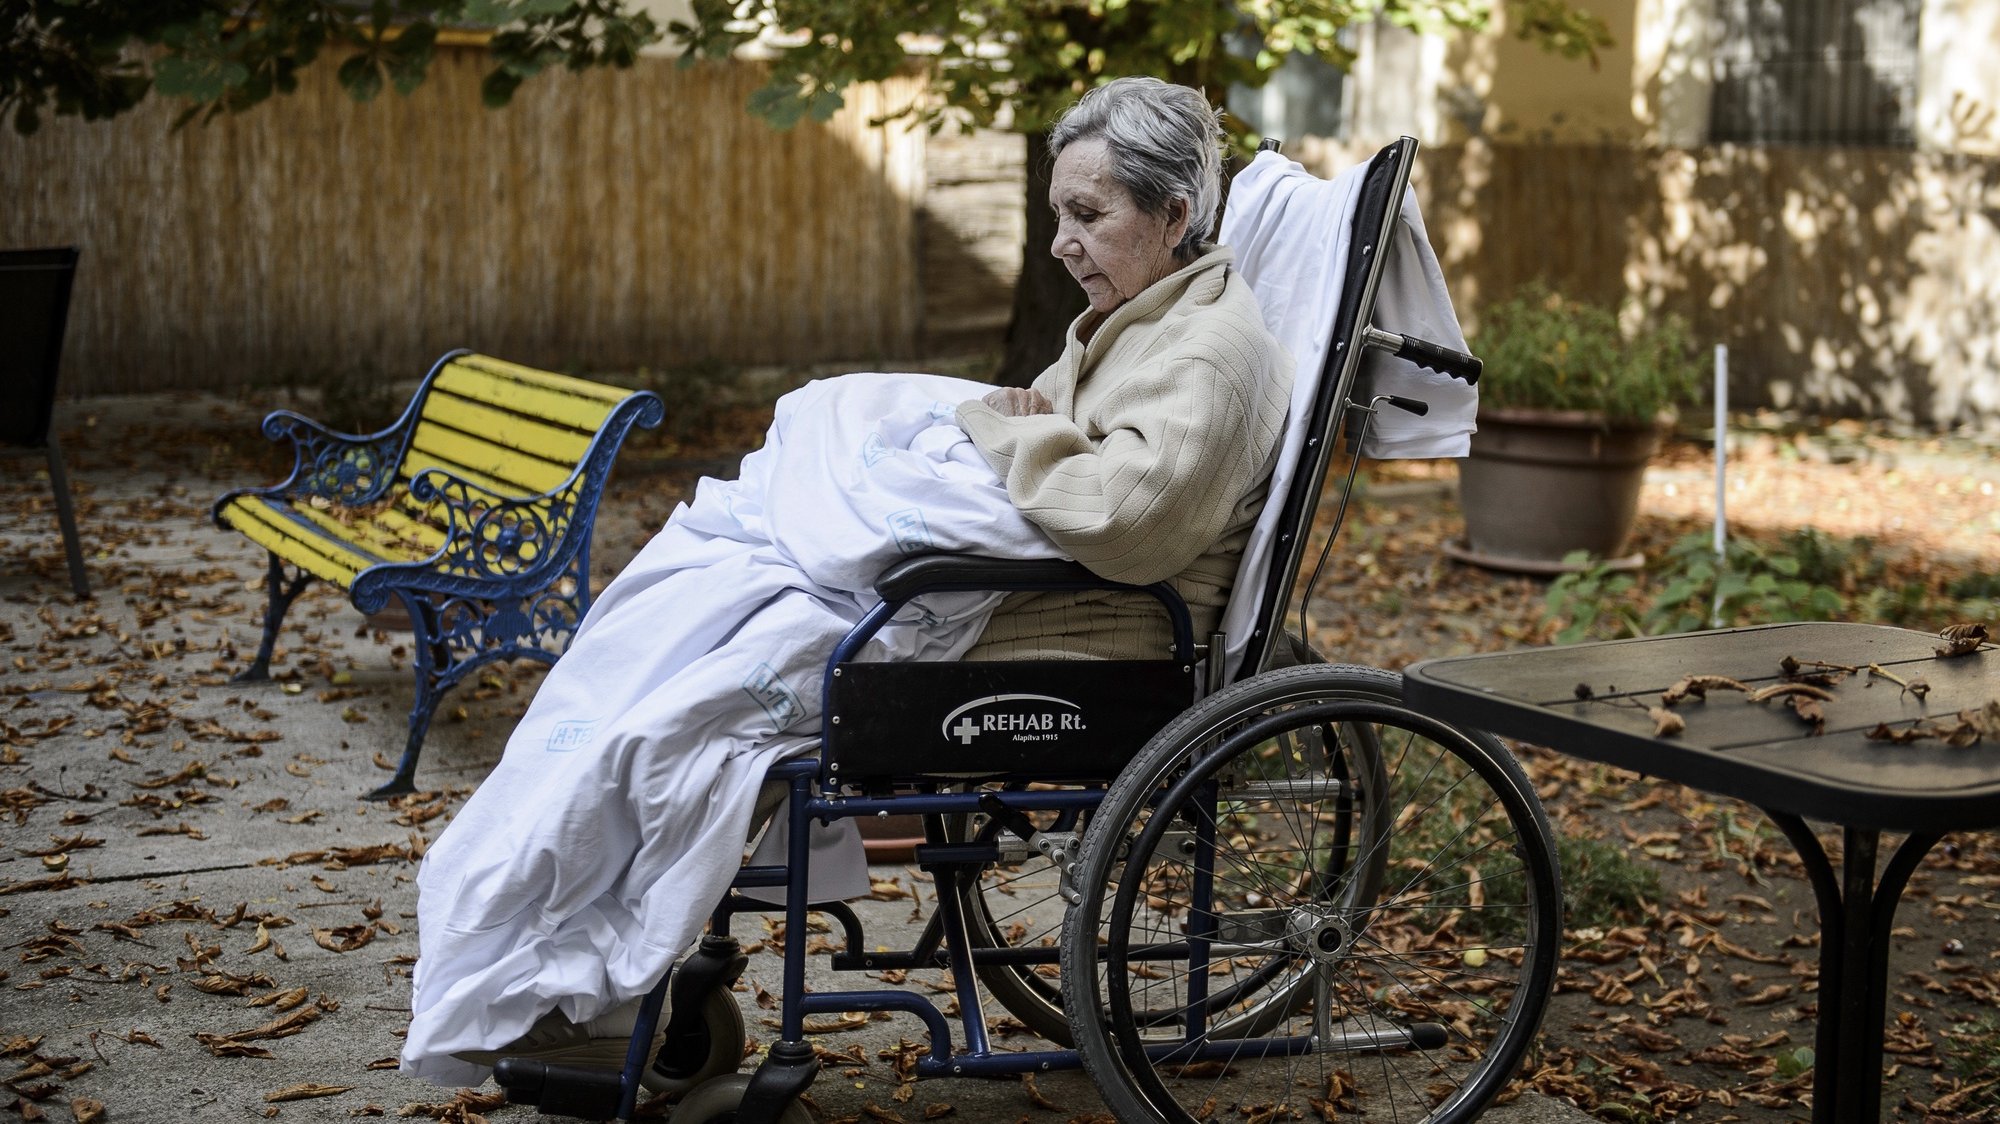 epa07912397 An elderly woman sits in her wheelchair in garden of the Hospice Department of Markhot Ferenc Hospital in Eger, northern Hungary, 18 September 2019 (issued 11 October 2019). World Hospice and Palliative Care Day is observed annually on the second Saturday of October, which falls on 12 October this year with the motto &#039;My care is my right.&#039; The first such event was organised in 2005 by a committee of the Worldwide Palliative Care Alliance, a wordwide network of hospice and palliative care organisations to draw attention to the needs of people who have been impacted by a life-limiting illness. Hospices operate to alleviate the pain and lessen the mental suffering of terminally ill patients while focusing on humane treatment and the protection of personal dignity. In Hungary, the foundraising events dedicated to the development of the hospice professsion on this special day are co-ordinated by the Hungarian Hospice-Palliative Association, which has been providing care for incurable cancer patients in Budapest since 1991.  EPA/PETER KOMKA HUNGARY OUT - ATTENTION: This Image is part of a PHOTO SET